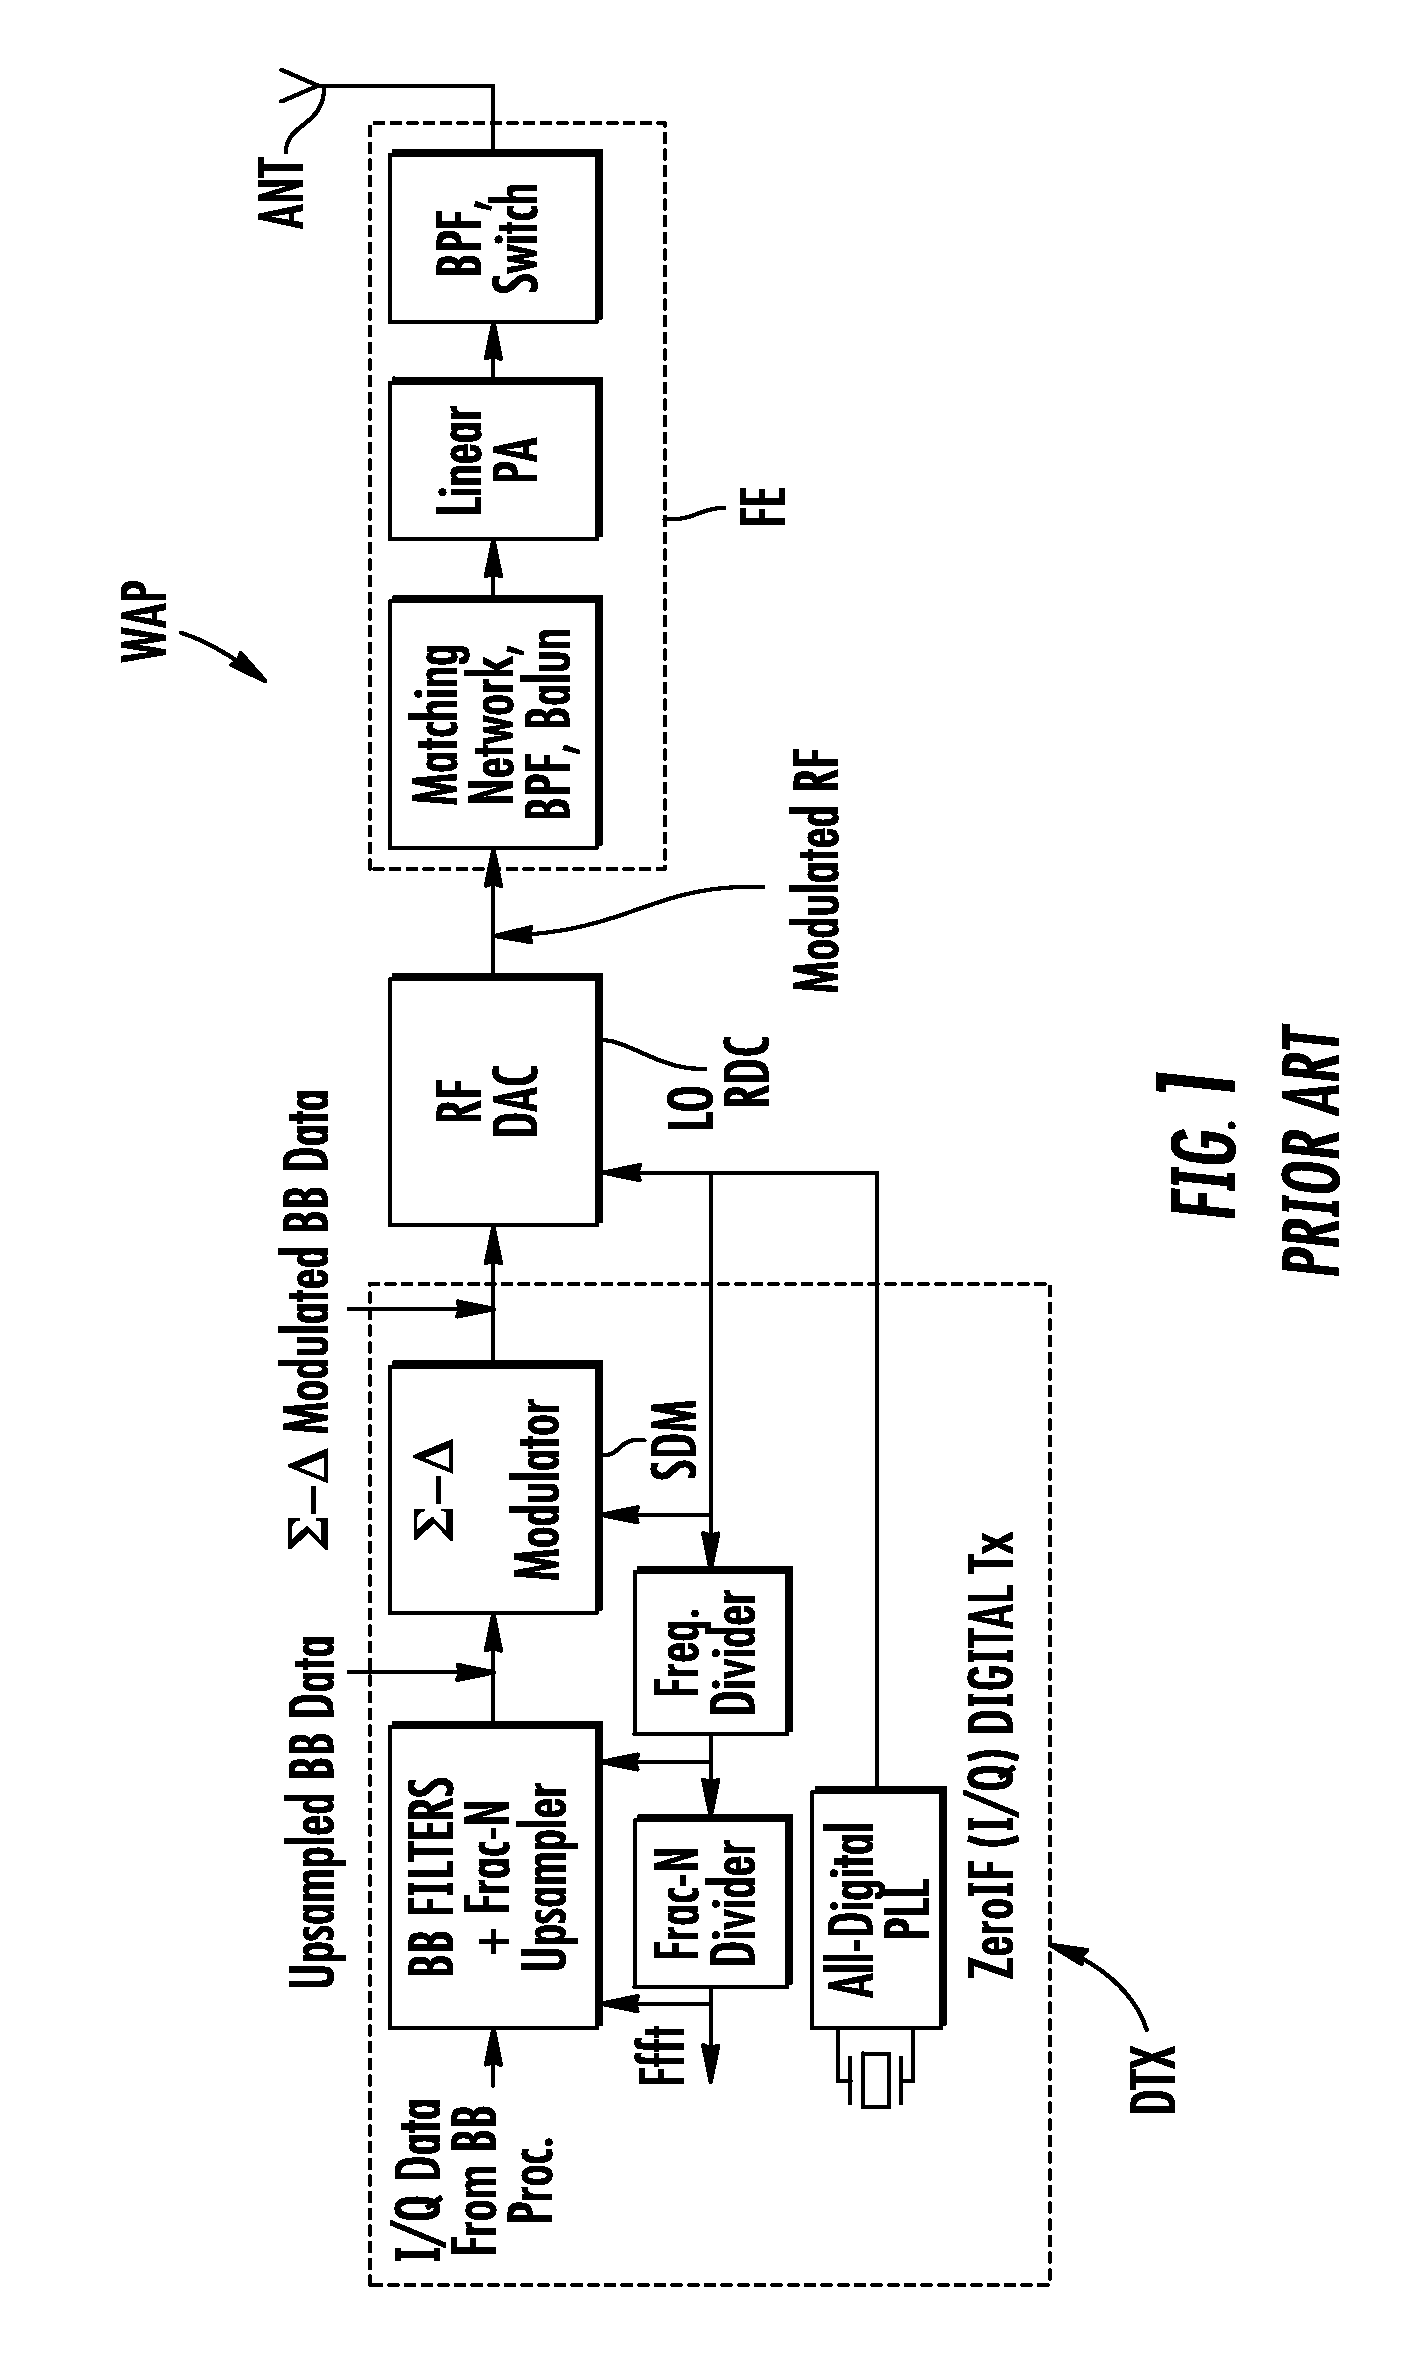 Method for notch filtering a digital signal, and corresponding electronic device